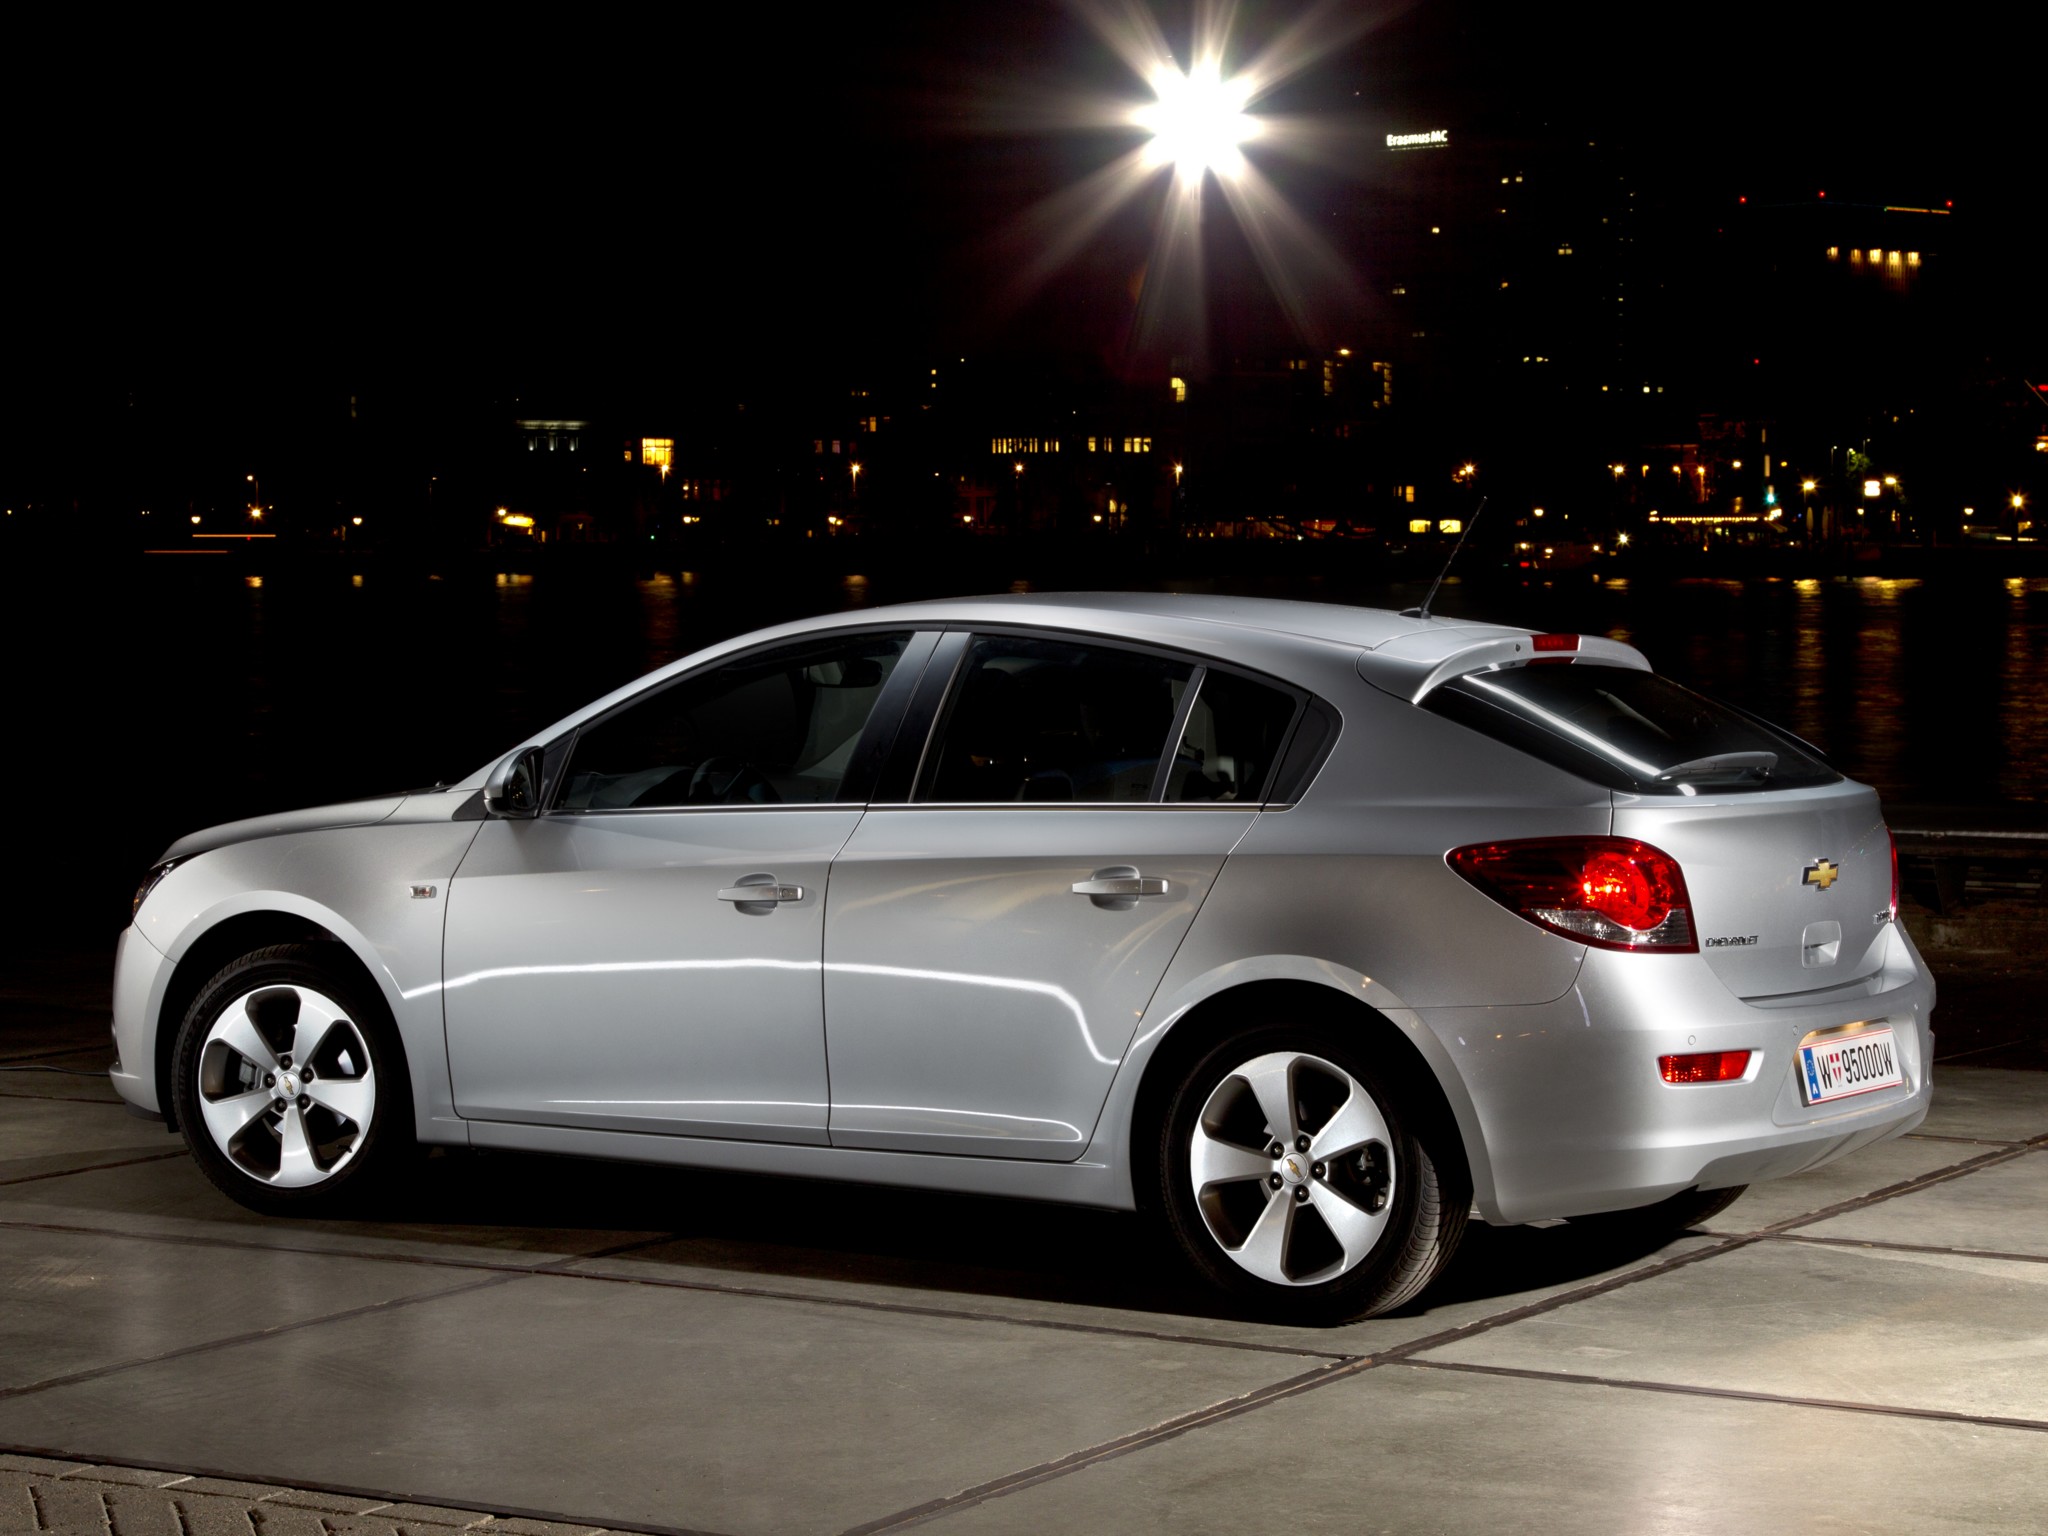 Hatchback Chevy Cruze Coming Soon? - Autos.ca